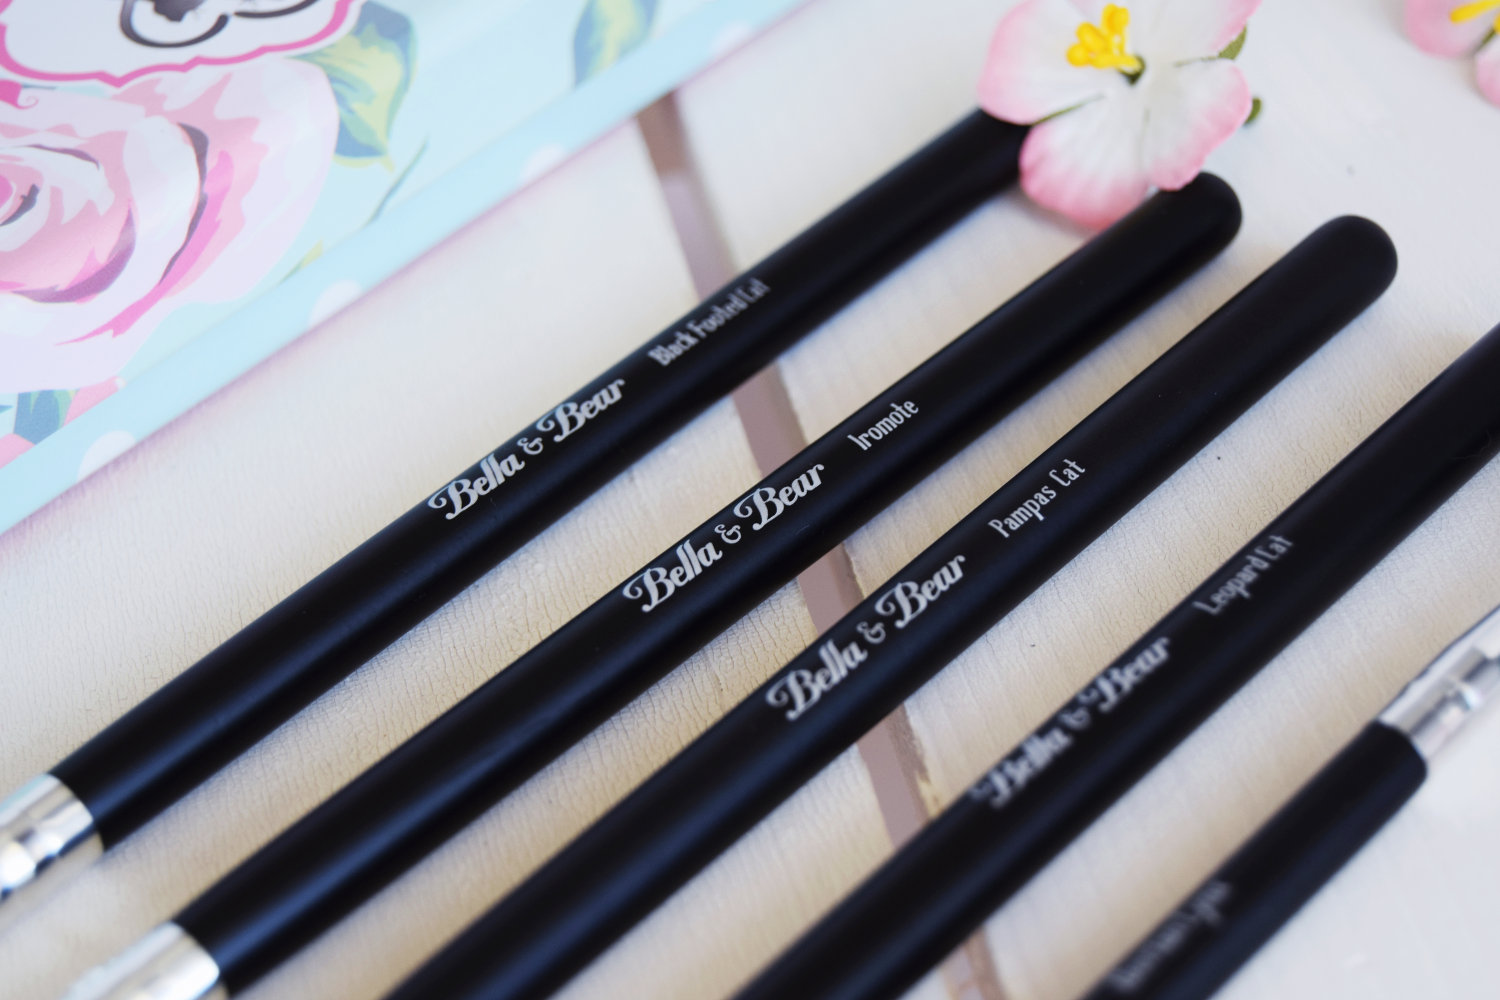 bella_and_bears_cats_eyes_eye_brush_set_zalabell_beauty_review_4